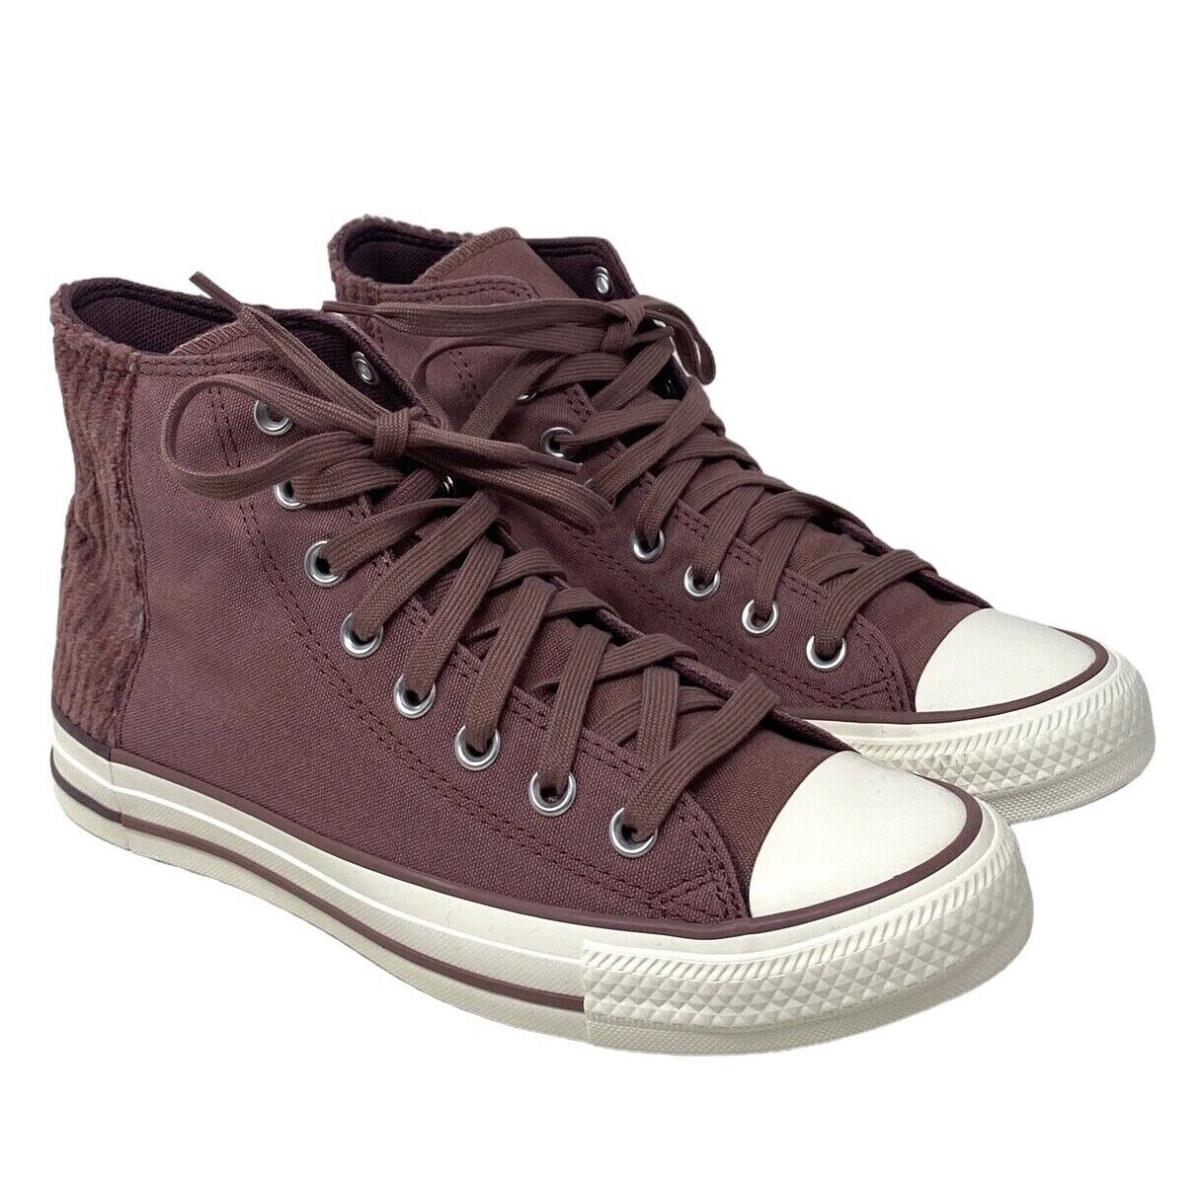 Converse Ctas High Top Sneakers Skate Brown Canvas For Men Casual Shoe A01343F